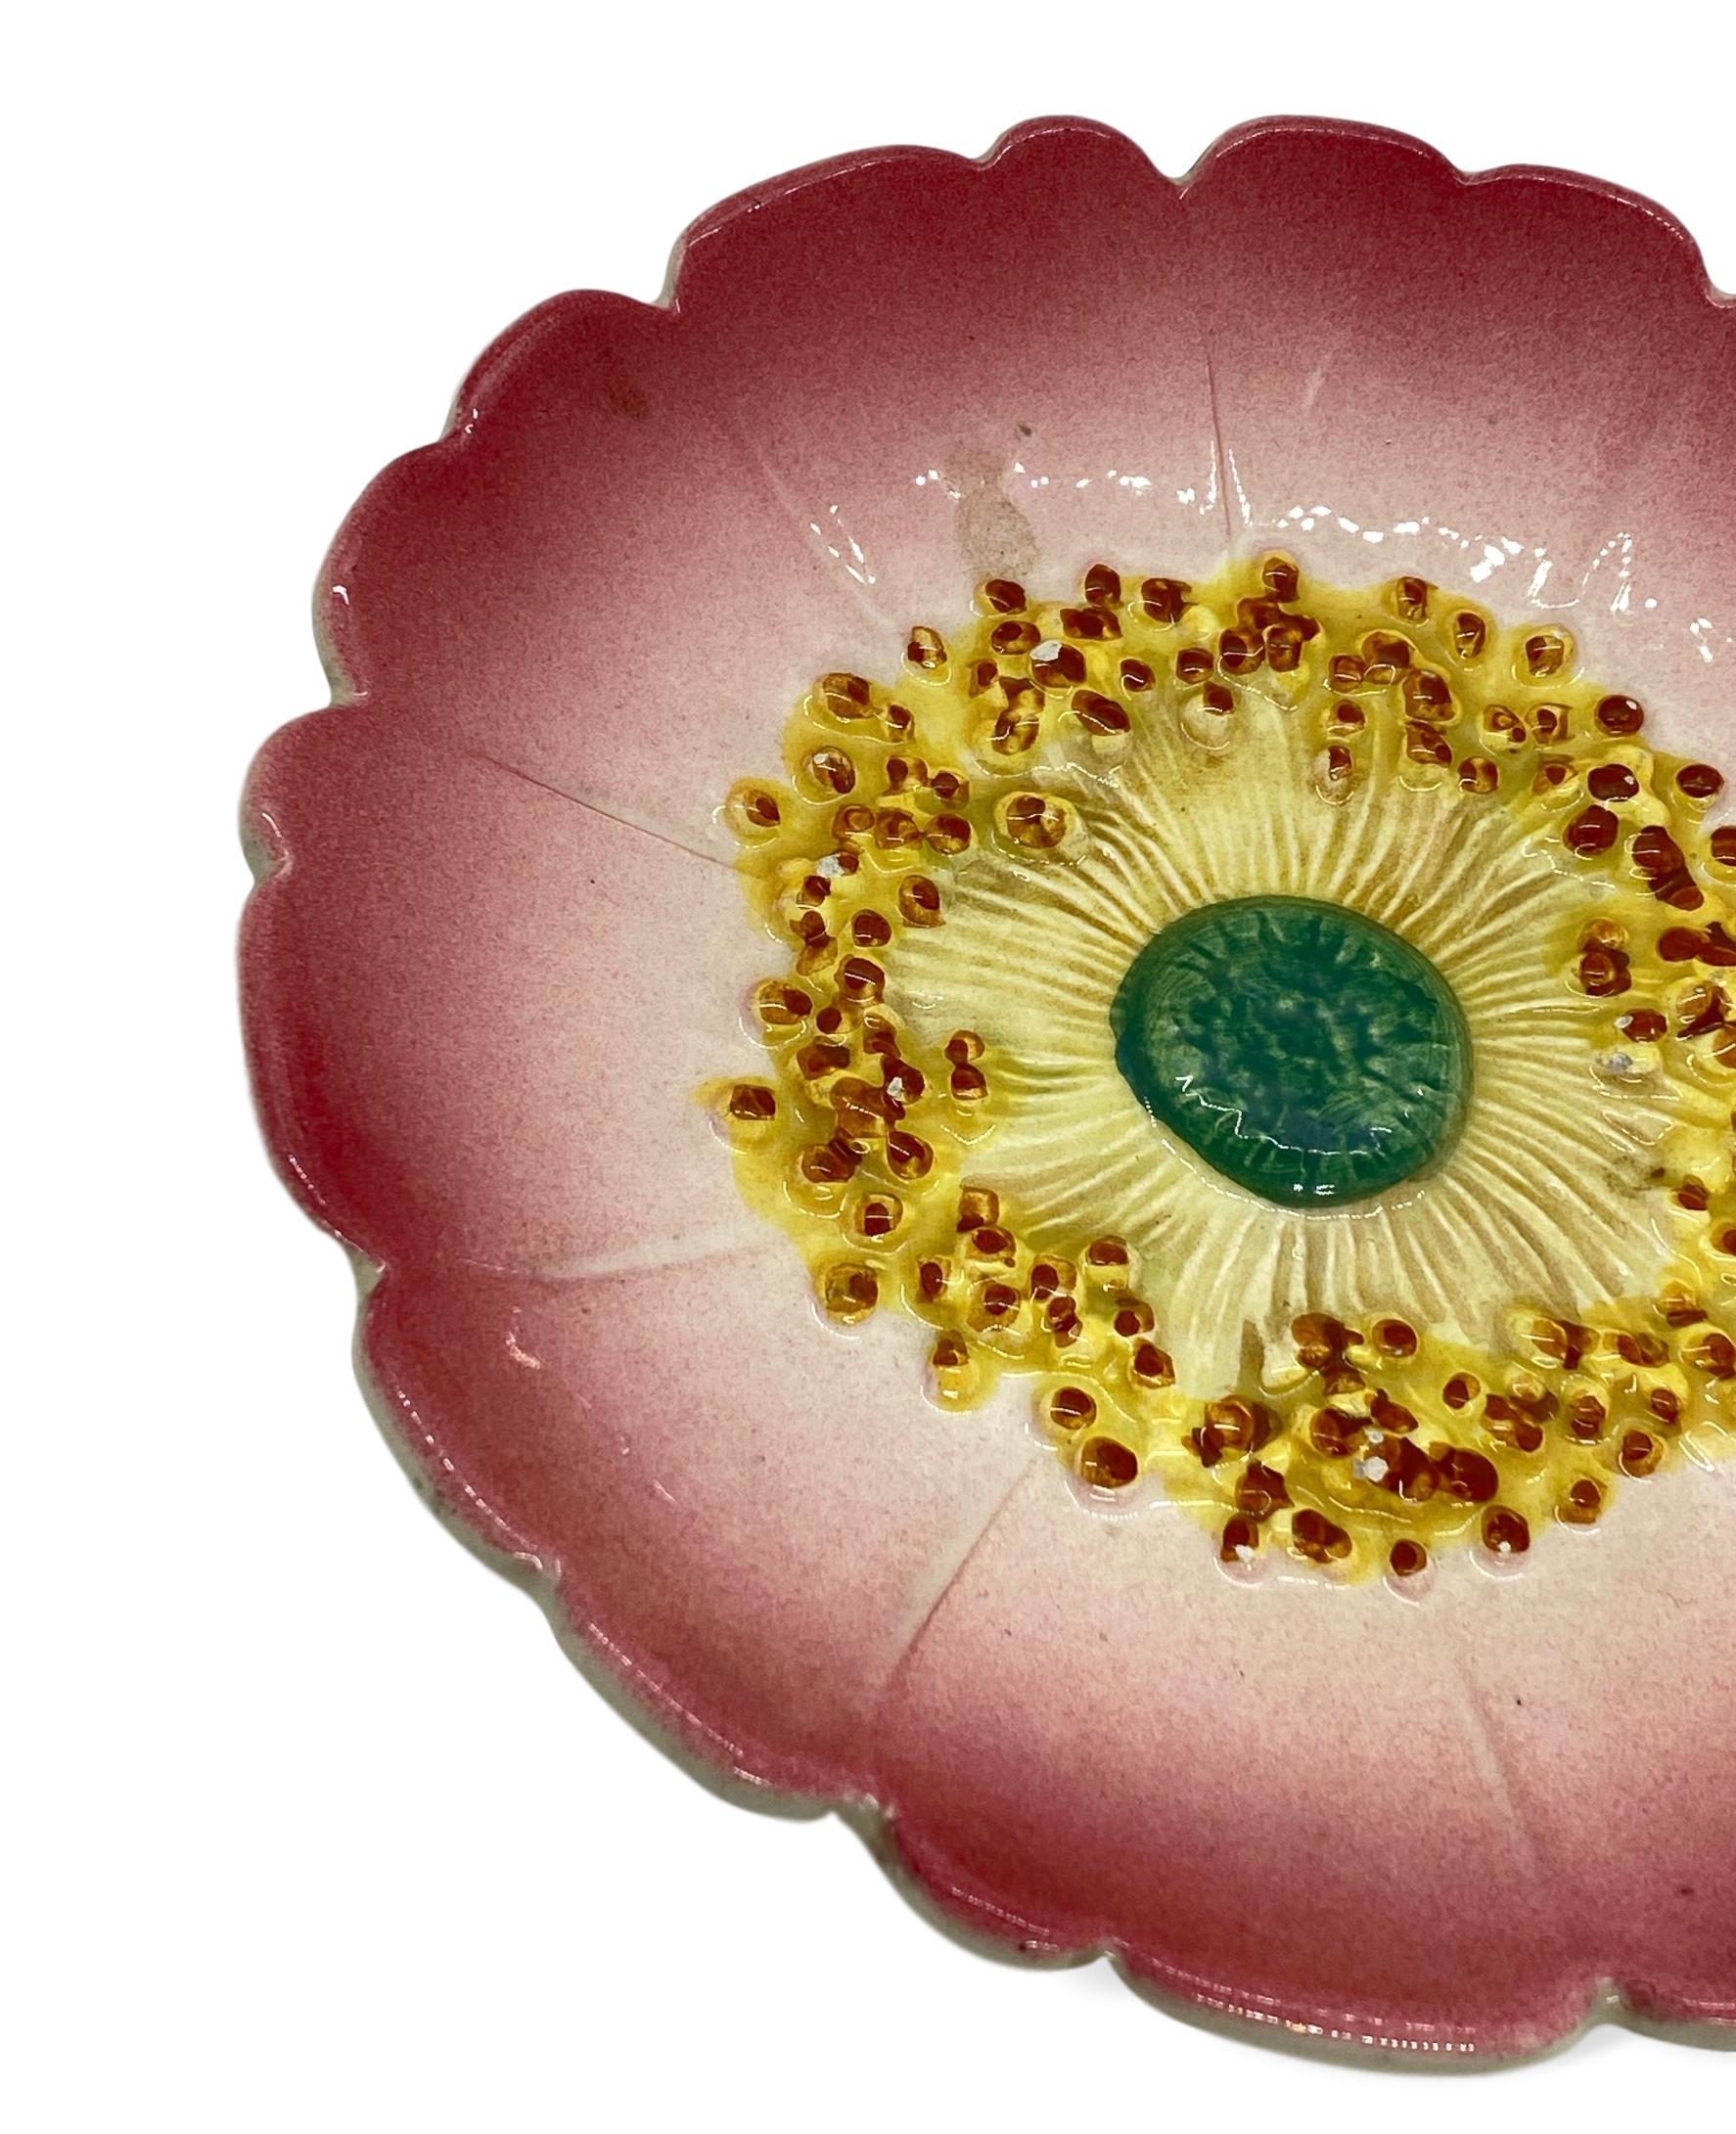 Delphin Massier Majolica (Barbotine) Trompe L'oeil pink flower plate, French, circa 1890, naturalistically molded as a rosehip flower. 
Measurements: Diameter 7.75 x Height 1.25.
For over 28 years we have been among the world's preeminent